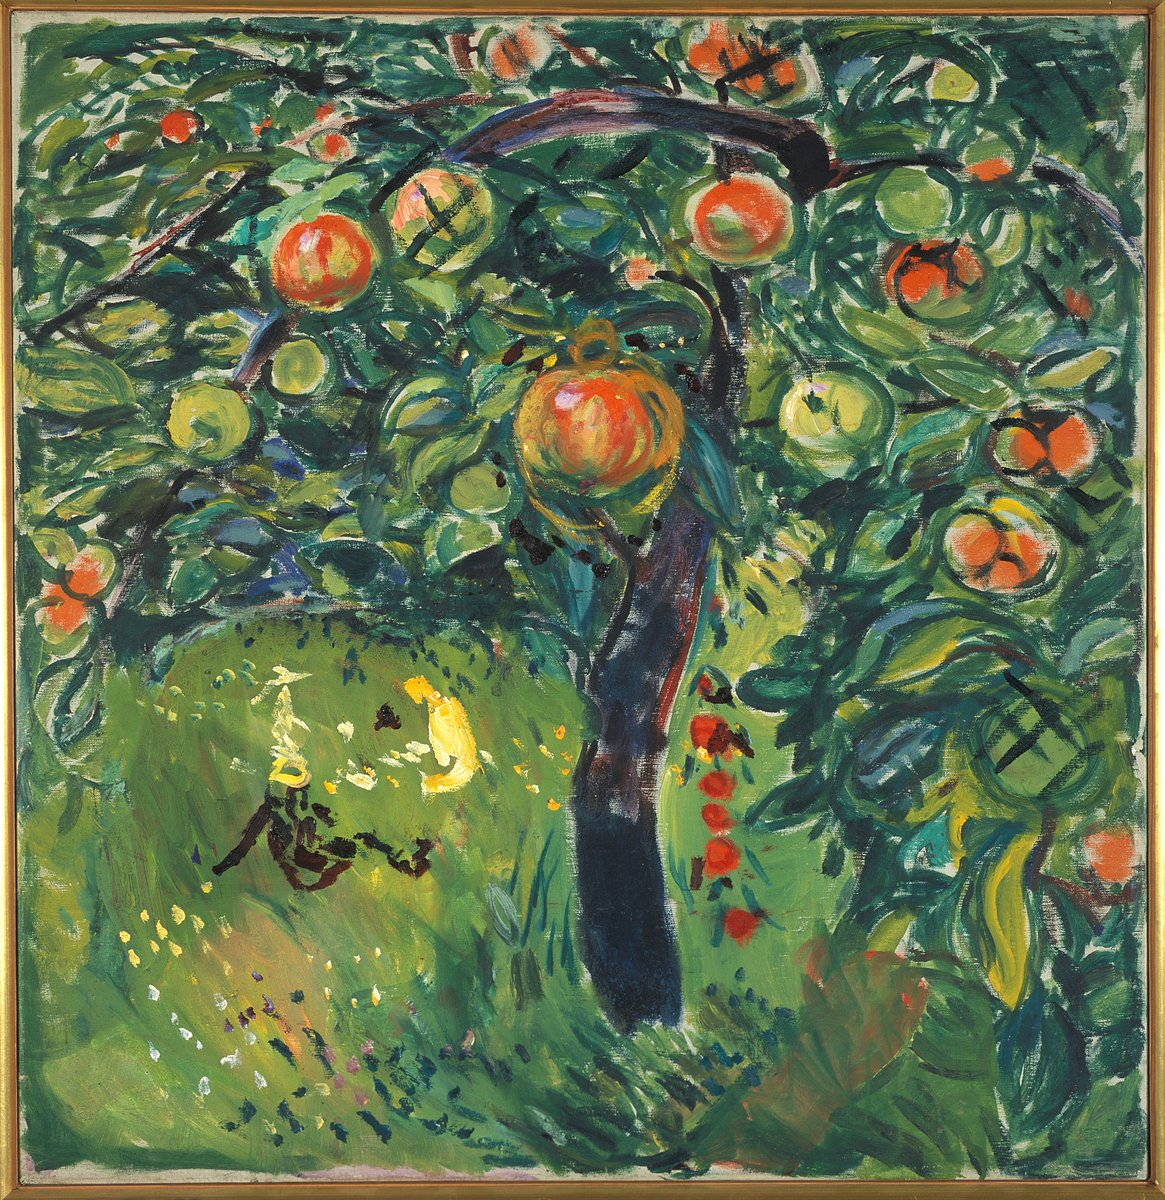 “Apple tree, apple tree hide me, so the old witch can’t find me; If she does she’ll pick my bones, and bury me under the marble stones.” The Old Witch, Joseph Jacobs #NationalStoryTellingWeek #FolkloreThursday image: Edvard Munch, Apple Tree